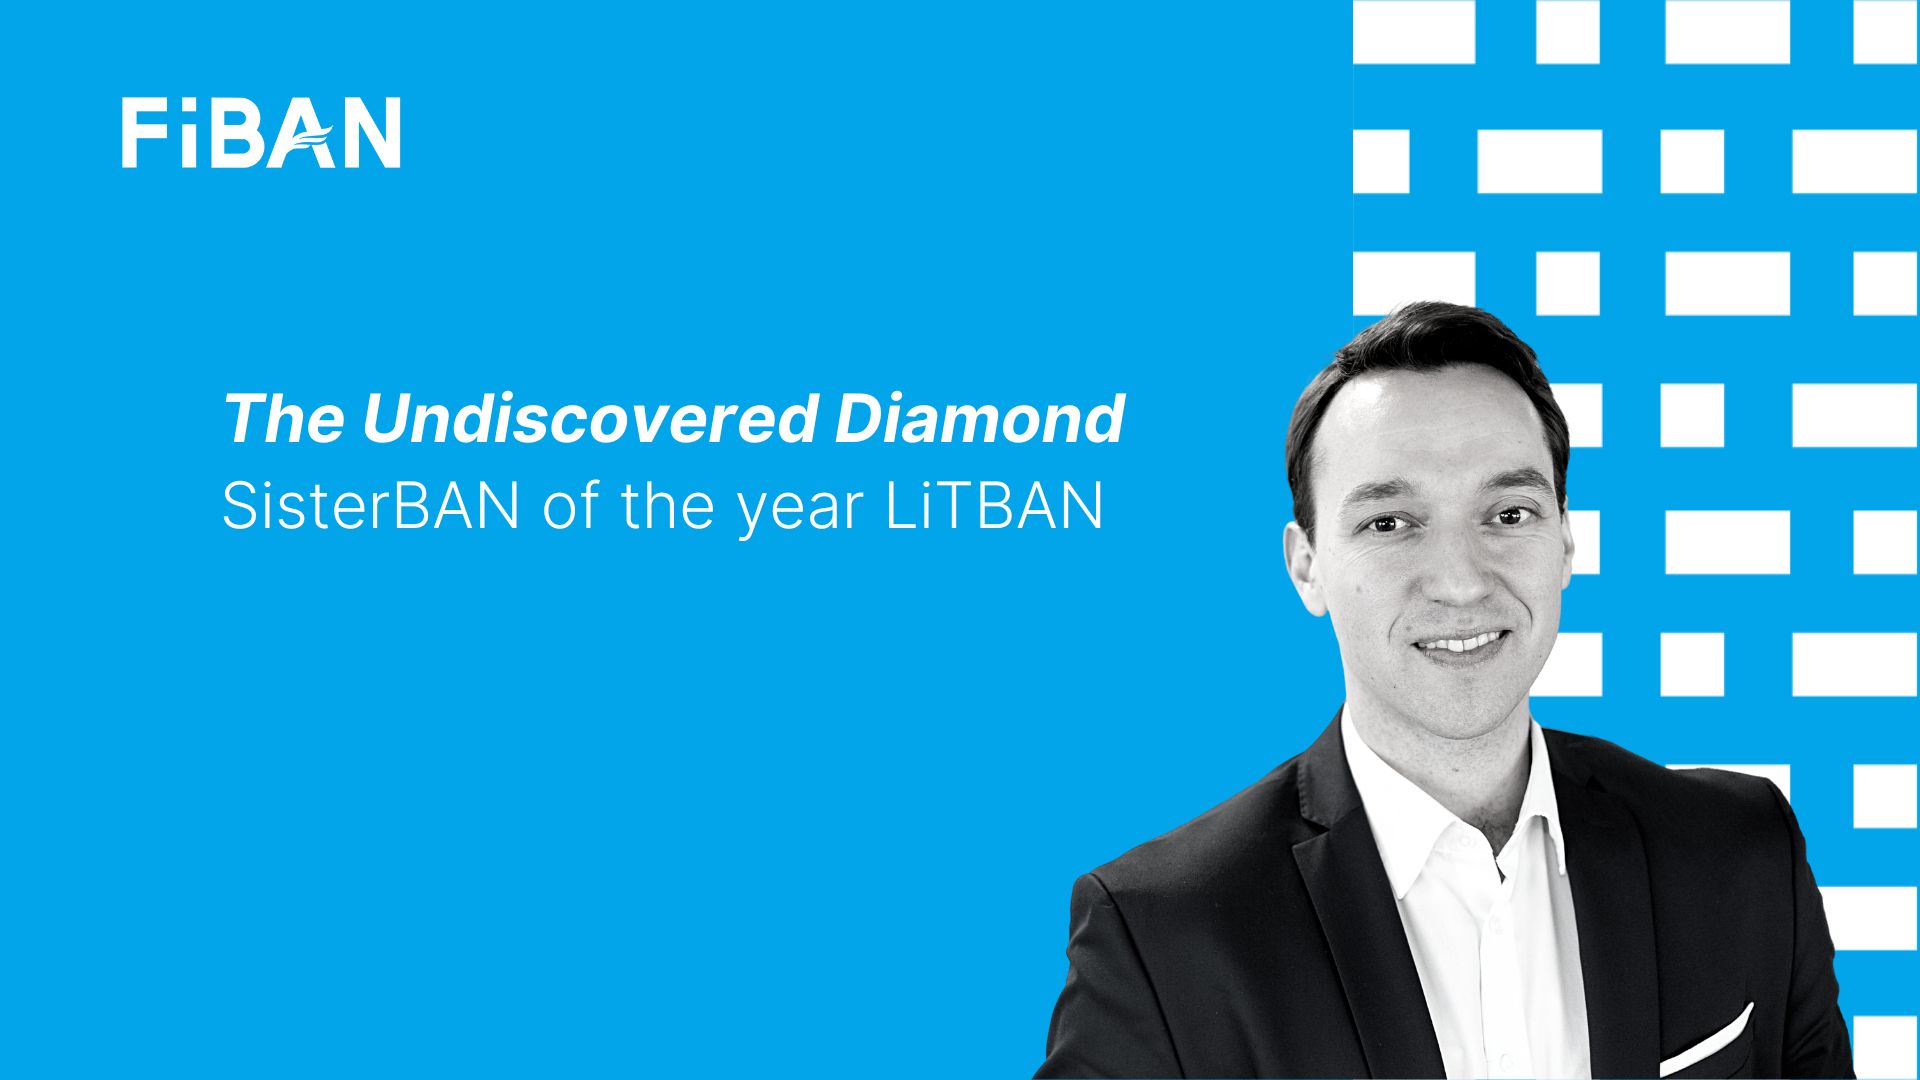 LitBAN was awarded as the sisterban of the year by FIBAN Finnish Business Angels Network.